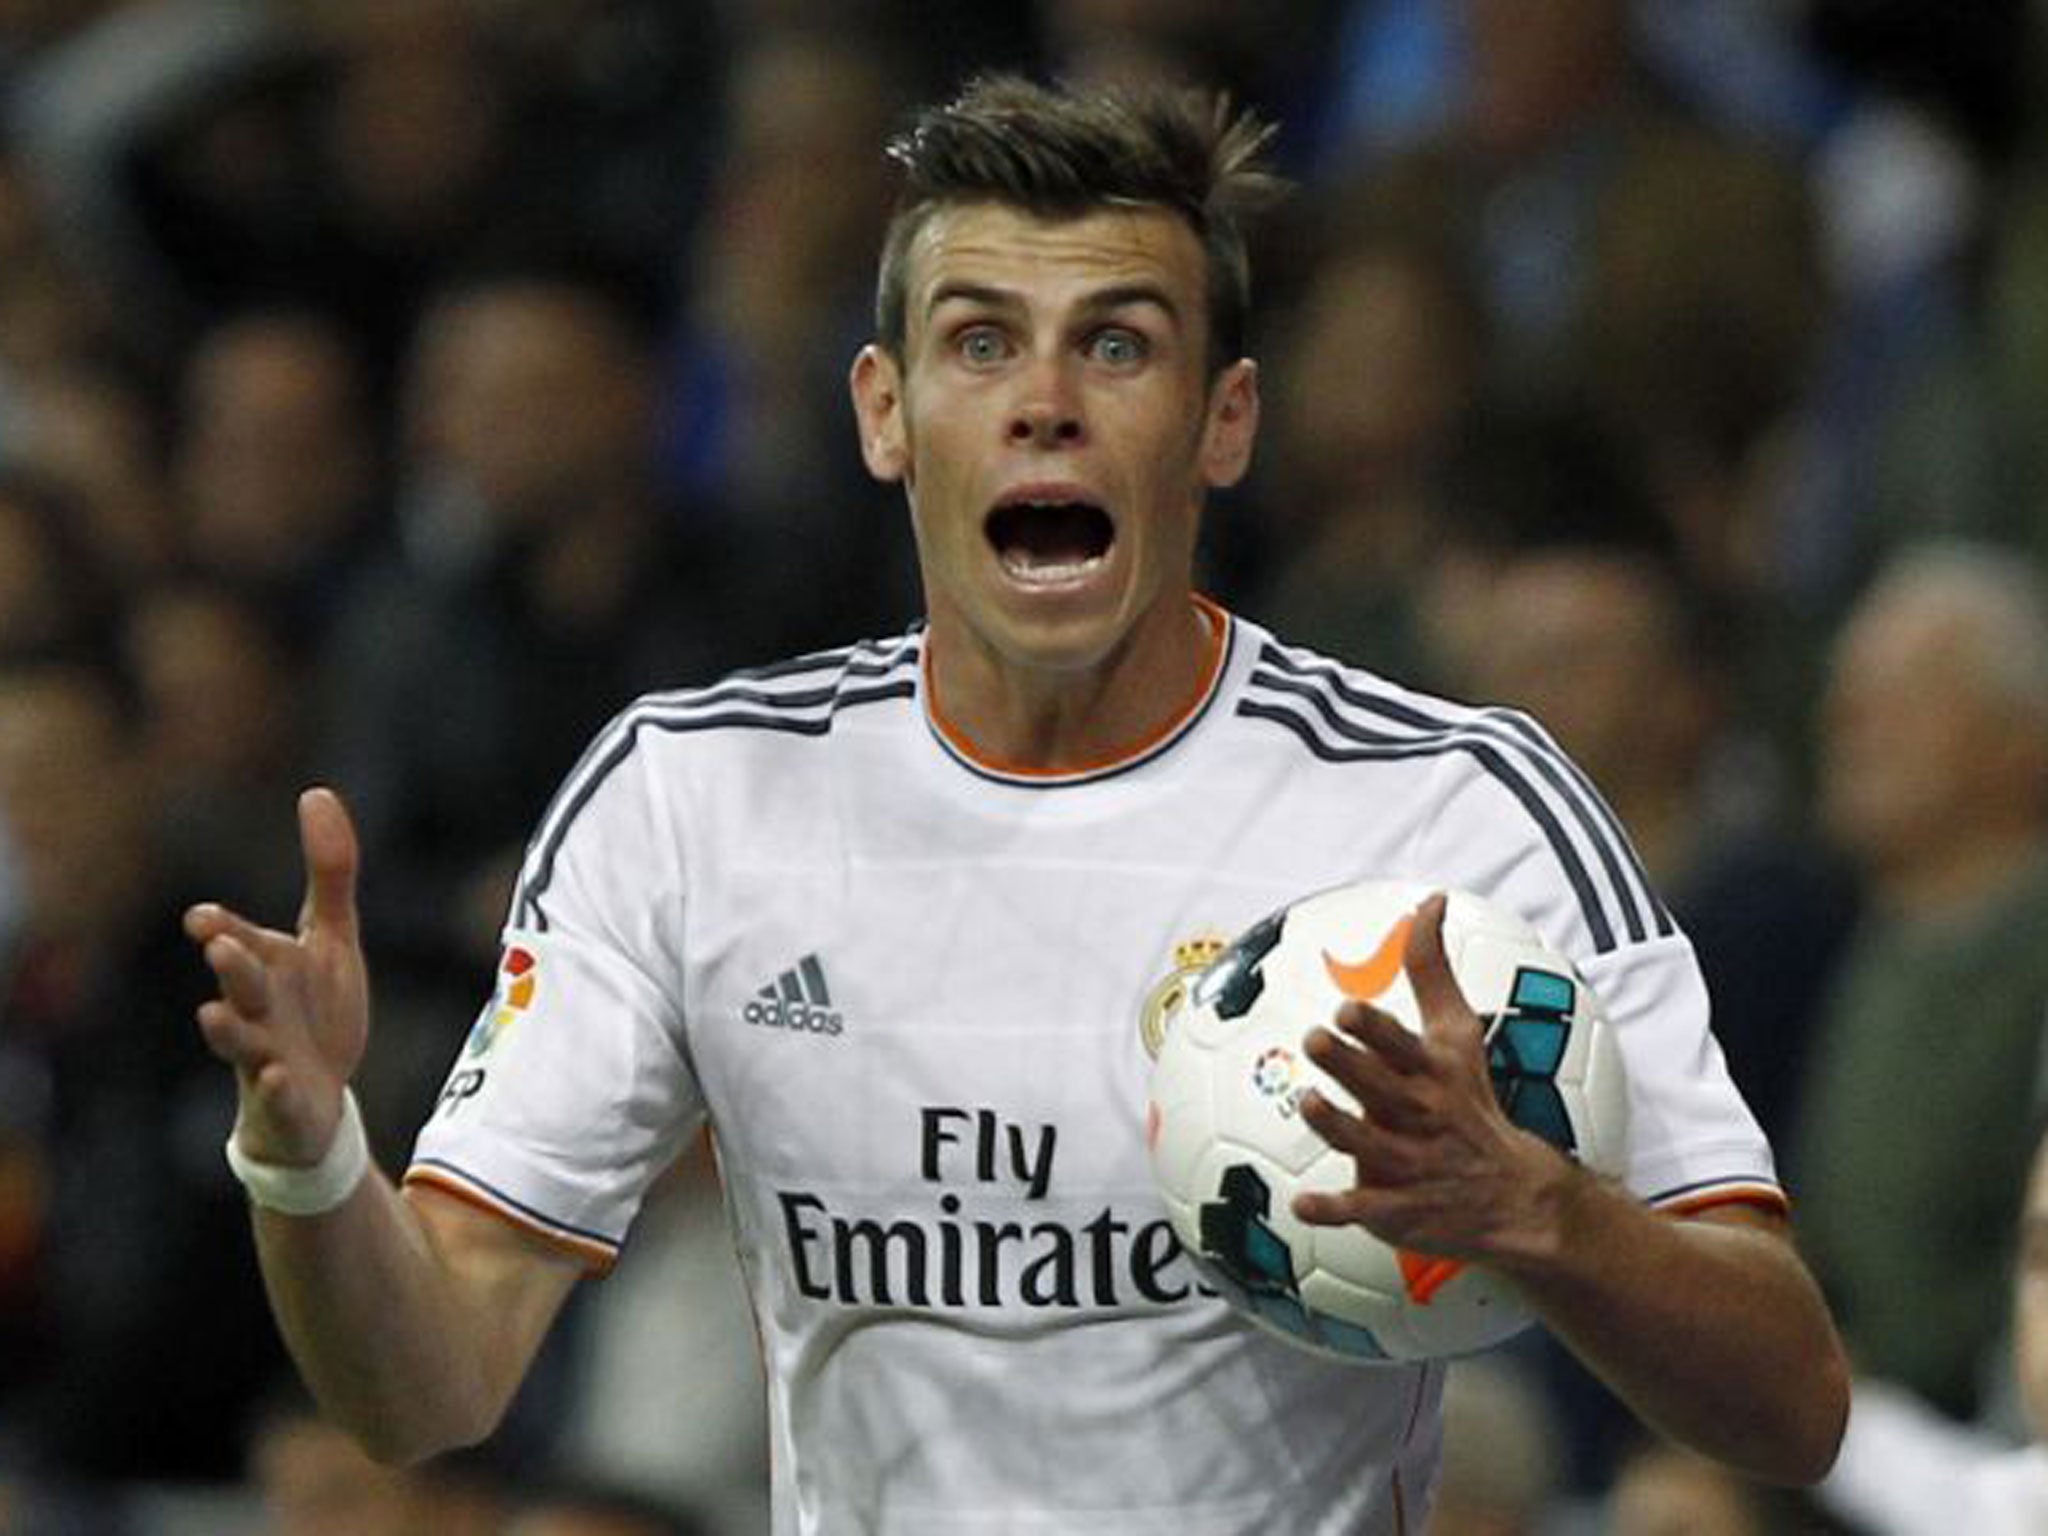 Gareth Bale looks on in frustration during Real Madrid's 1-0 derby defeat by Atletico at the Bernabeu on Saturday